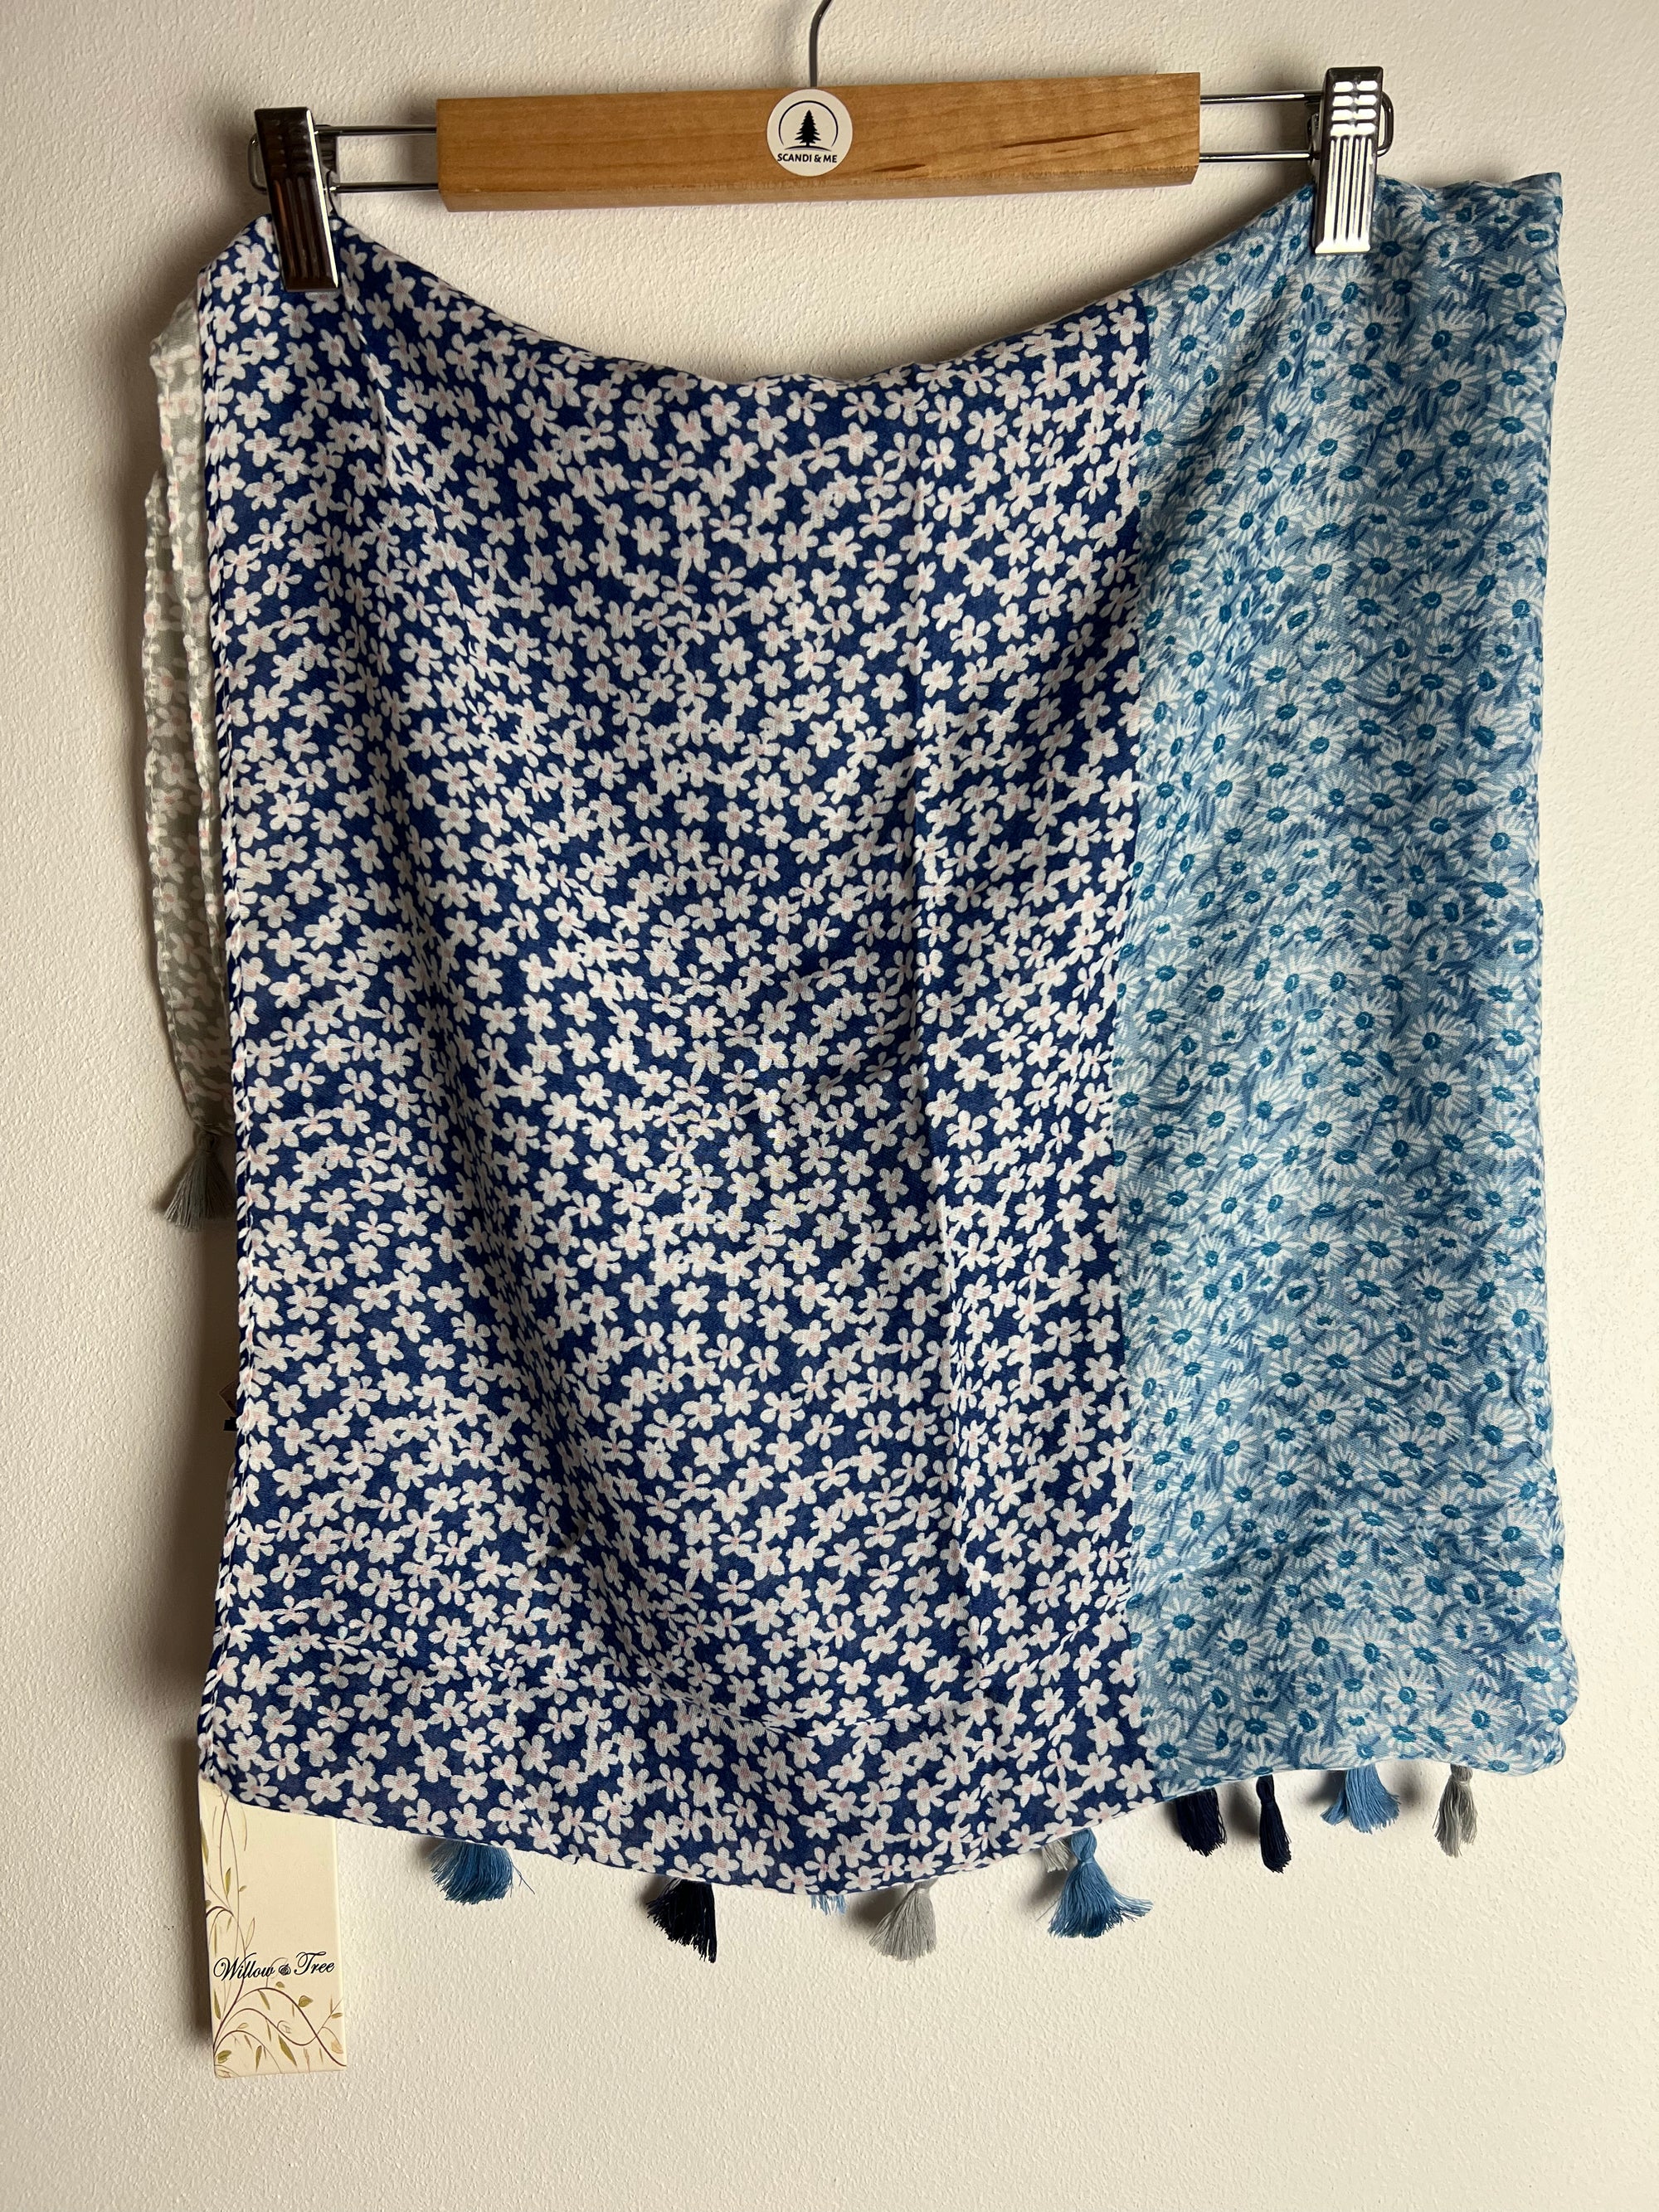 Oversized Scarf in Blue and grey shades with floral pattern & tassels from Willow Tree